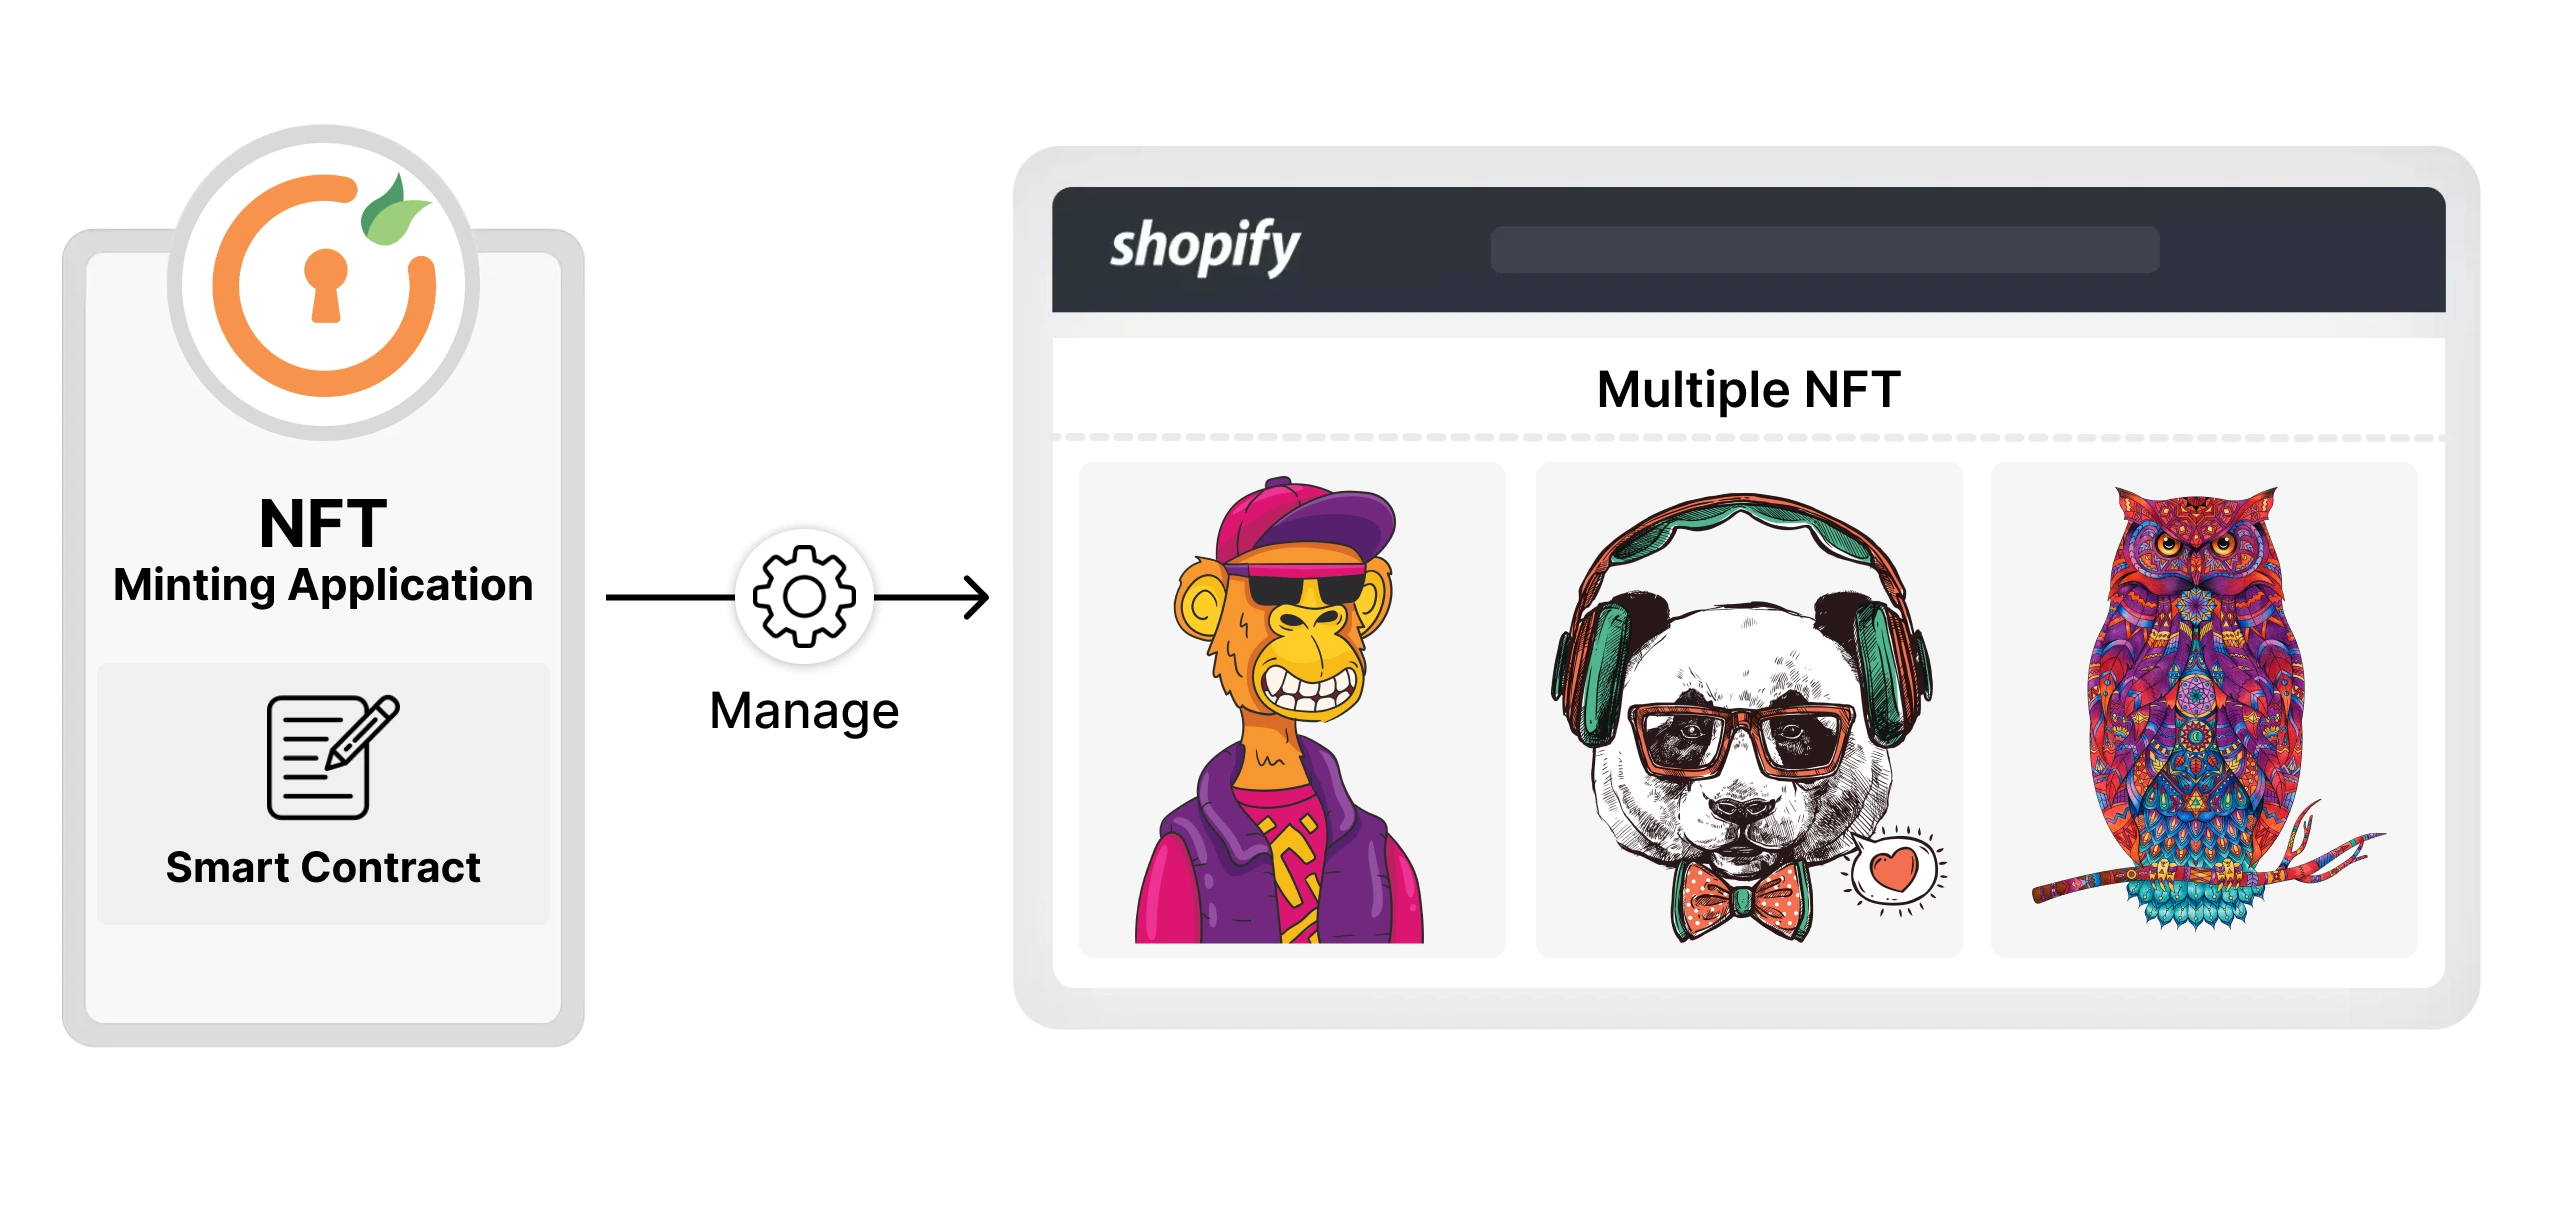 Shopify NFT Minting - Shopify NFT marketplace - Sell NFT on Shopify - one smart contract to manage multiple NFTs